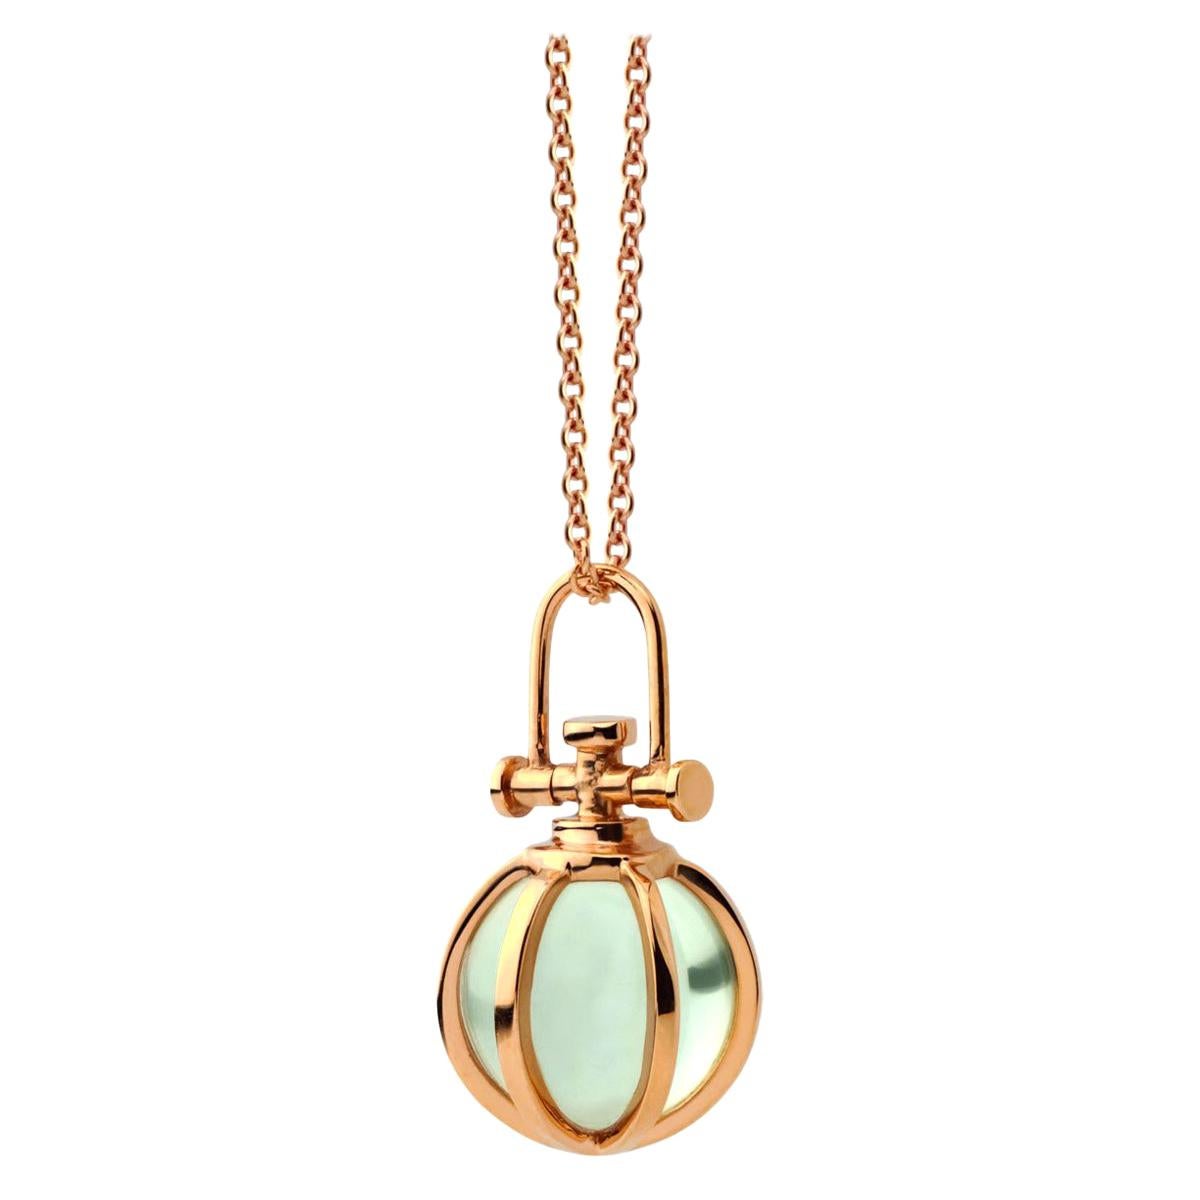 Modern Sacred 18K Rose Gold Crystal Ball Talisman Necklace with Green Amethyst